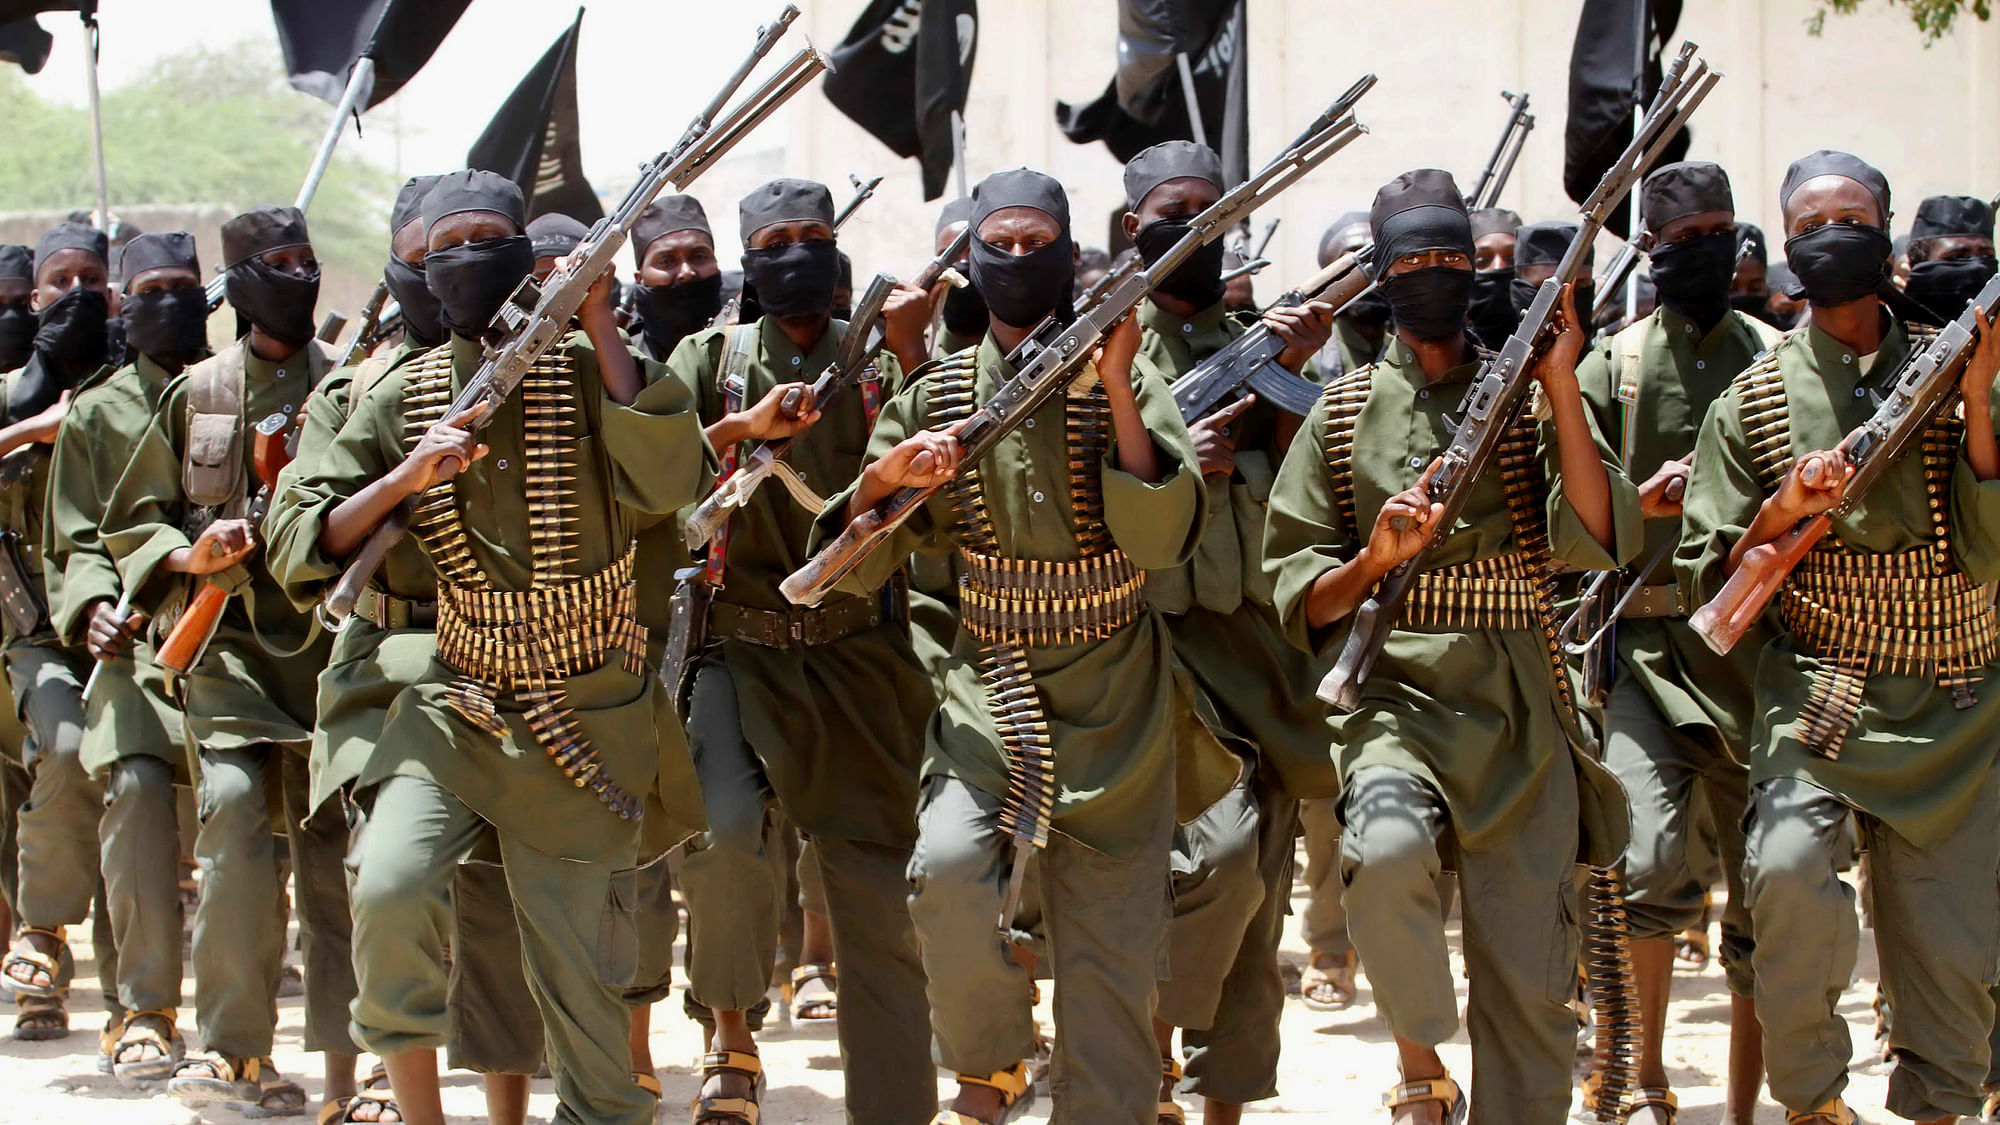 Recruits belonging to Somalia’s al-Qaeda-linked al Shabaab rebel group march during a passing out parade at a military training base in Afgoye, west of the capital Mogadishu in 2011. (File Photo: Reuters)